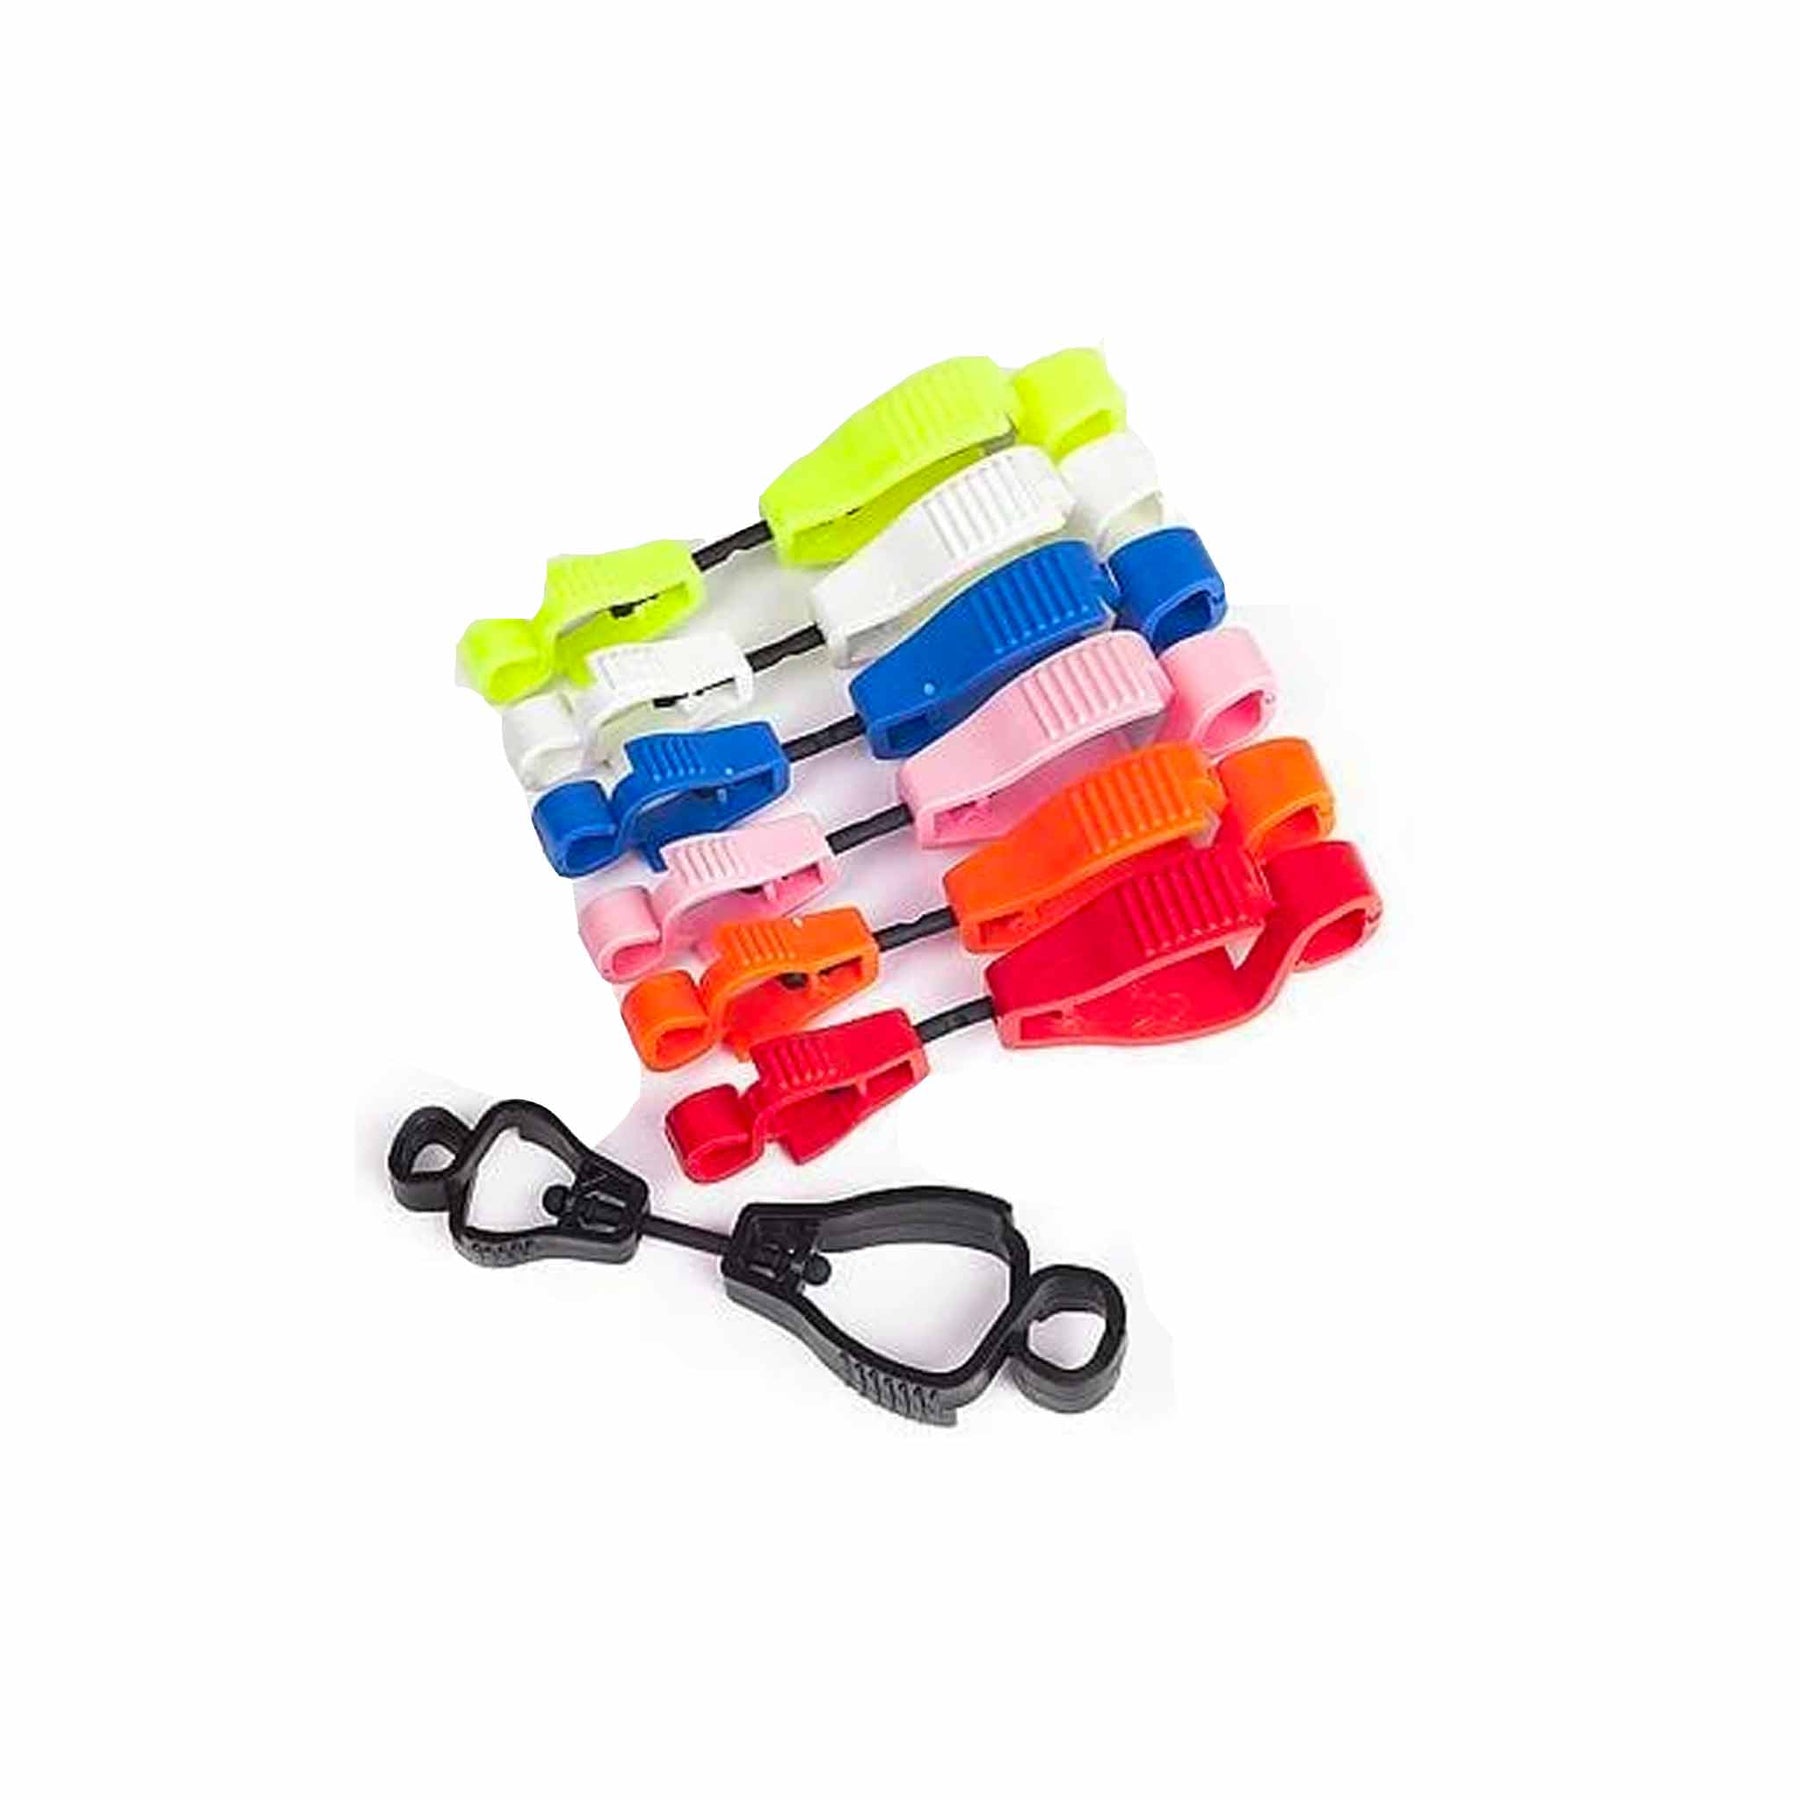 the claw glove clips in black, blue, red, pink, orange, white and yellow